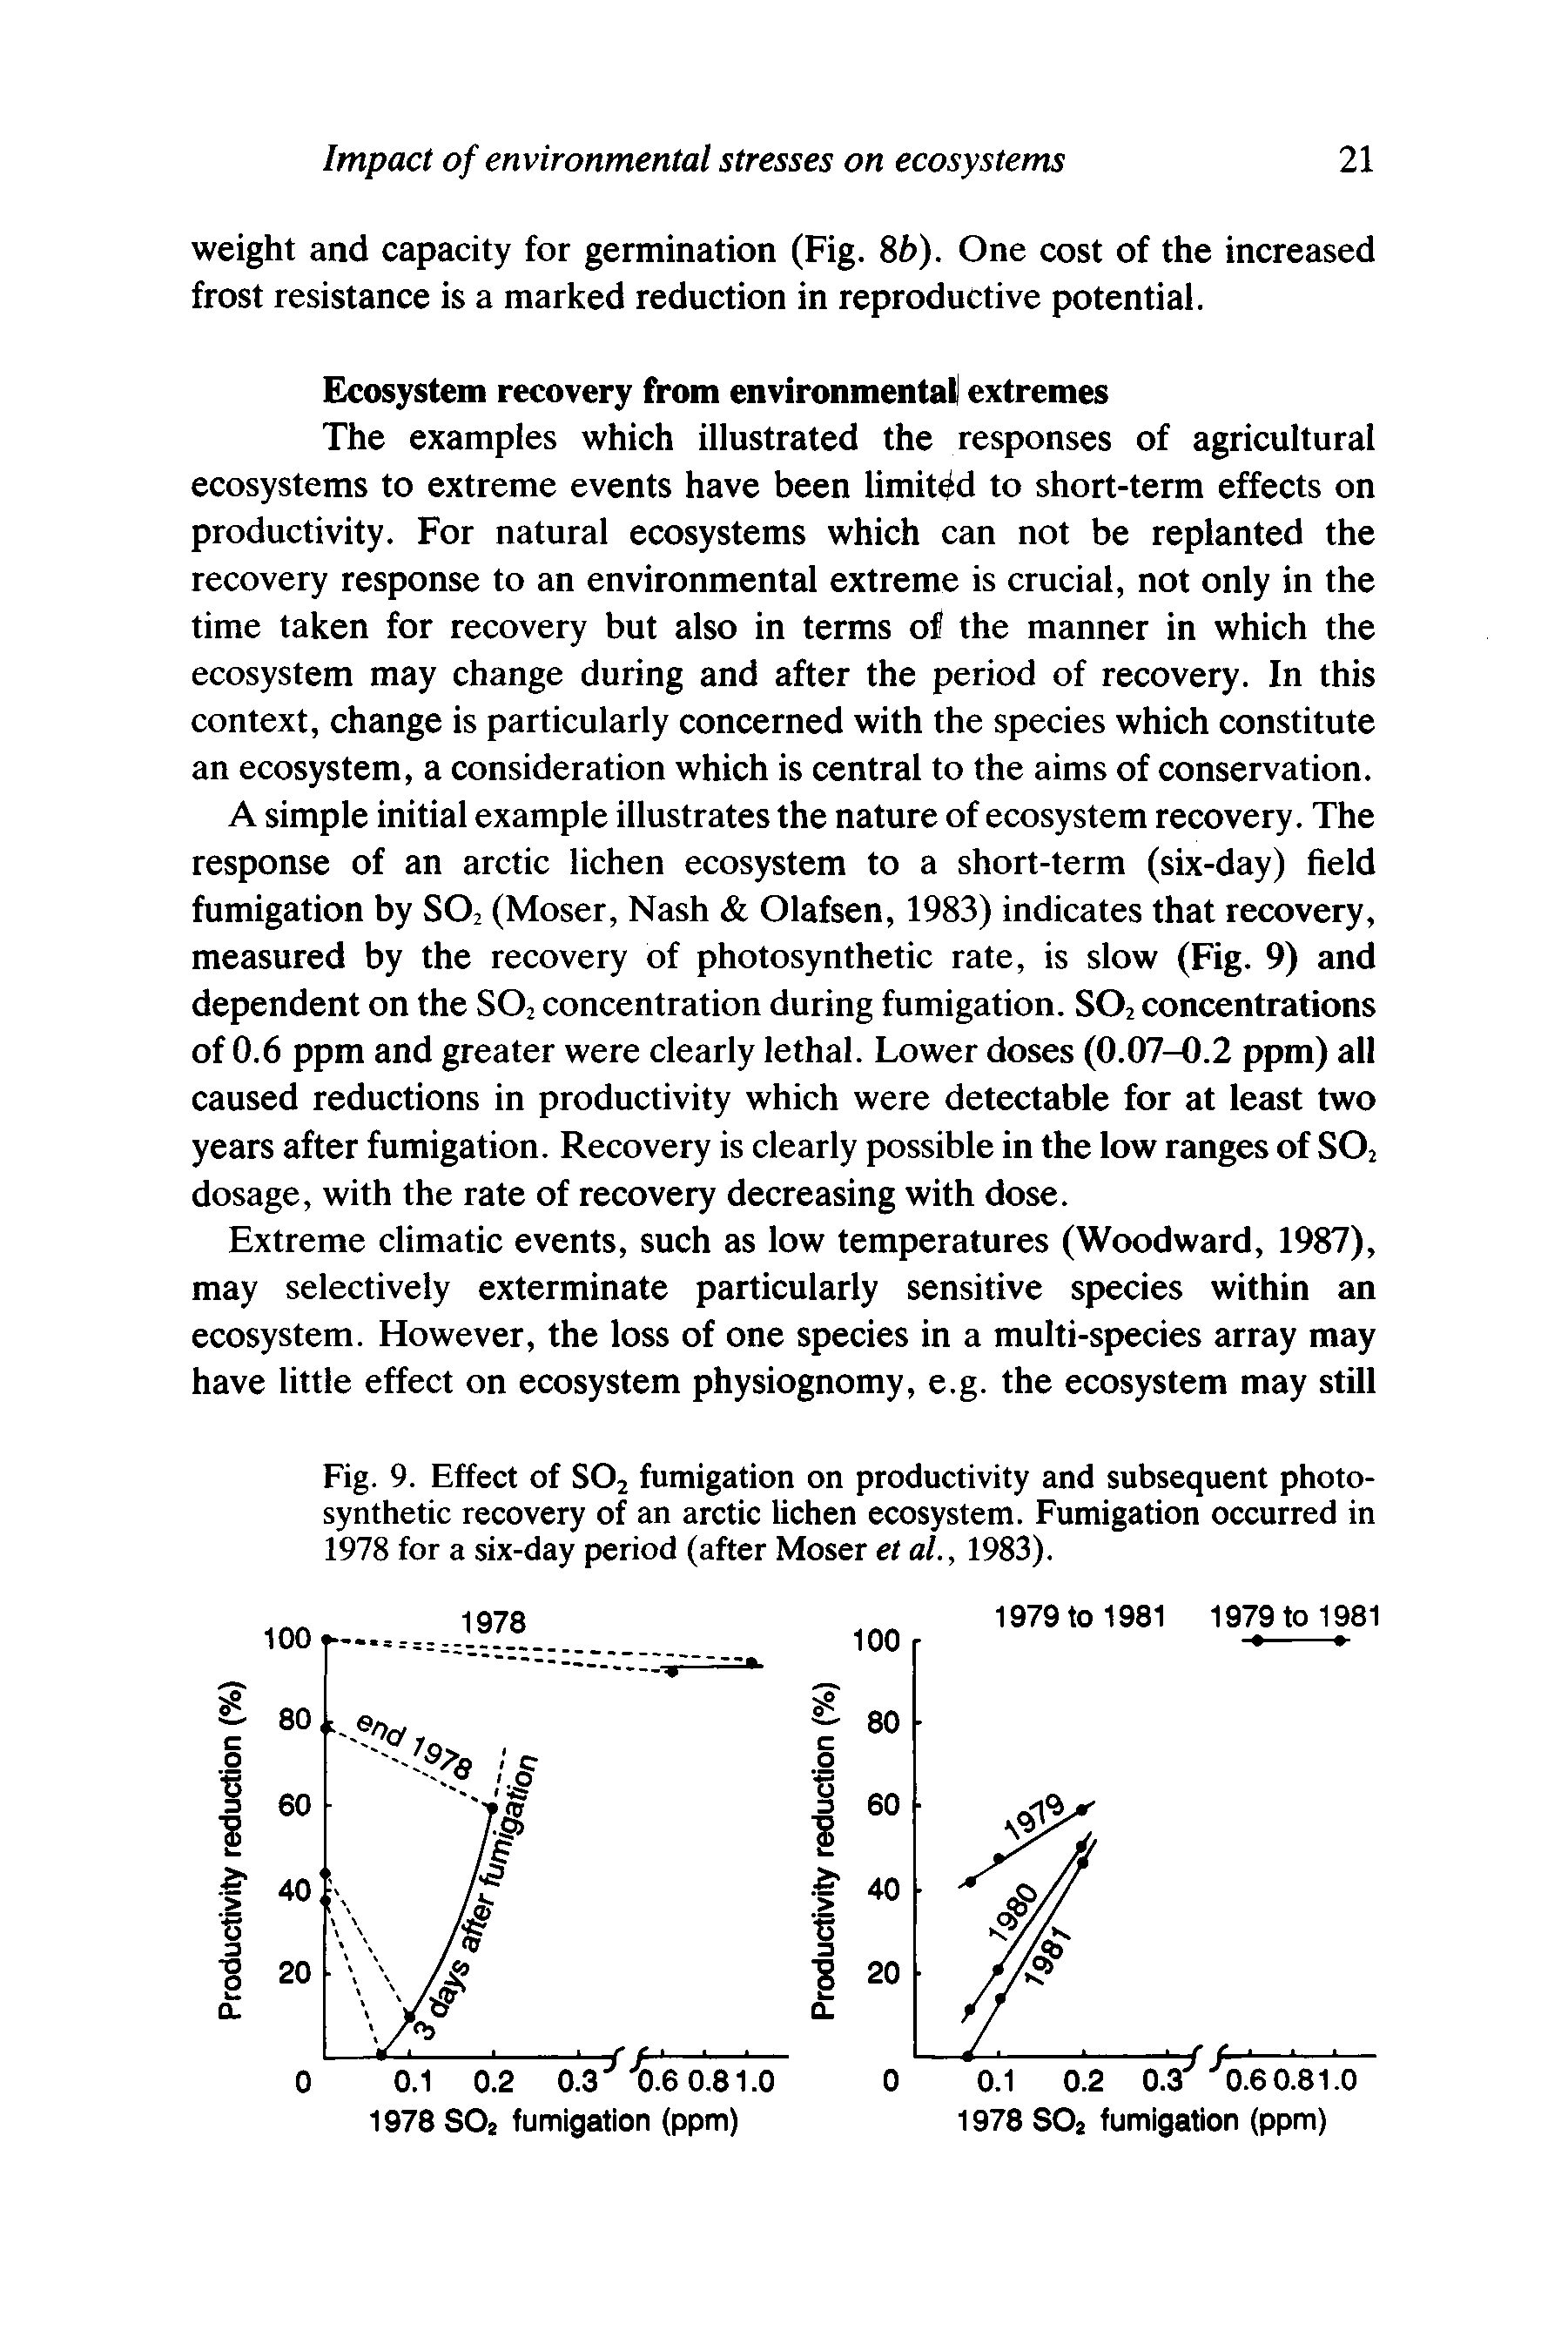 Fig. 9. Effect of SO2 fumigation on productivity and subsequent photosynthetic recovery of an arctic lichen ecosystem. Fumigation occurred in 1978 for a six-day period (after Moser et al., 1983).